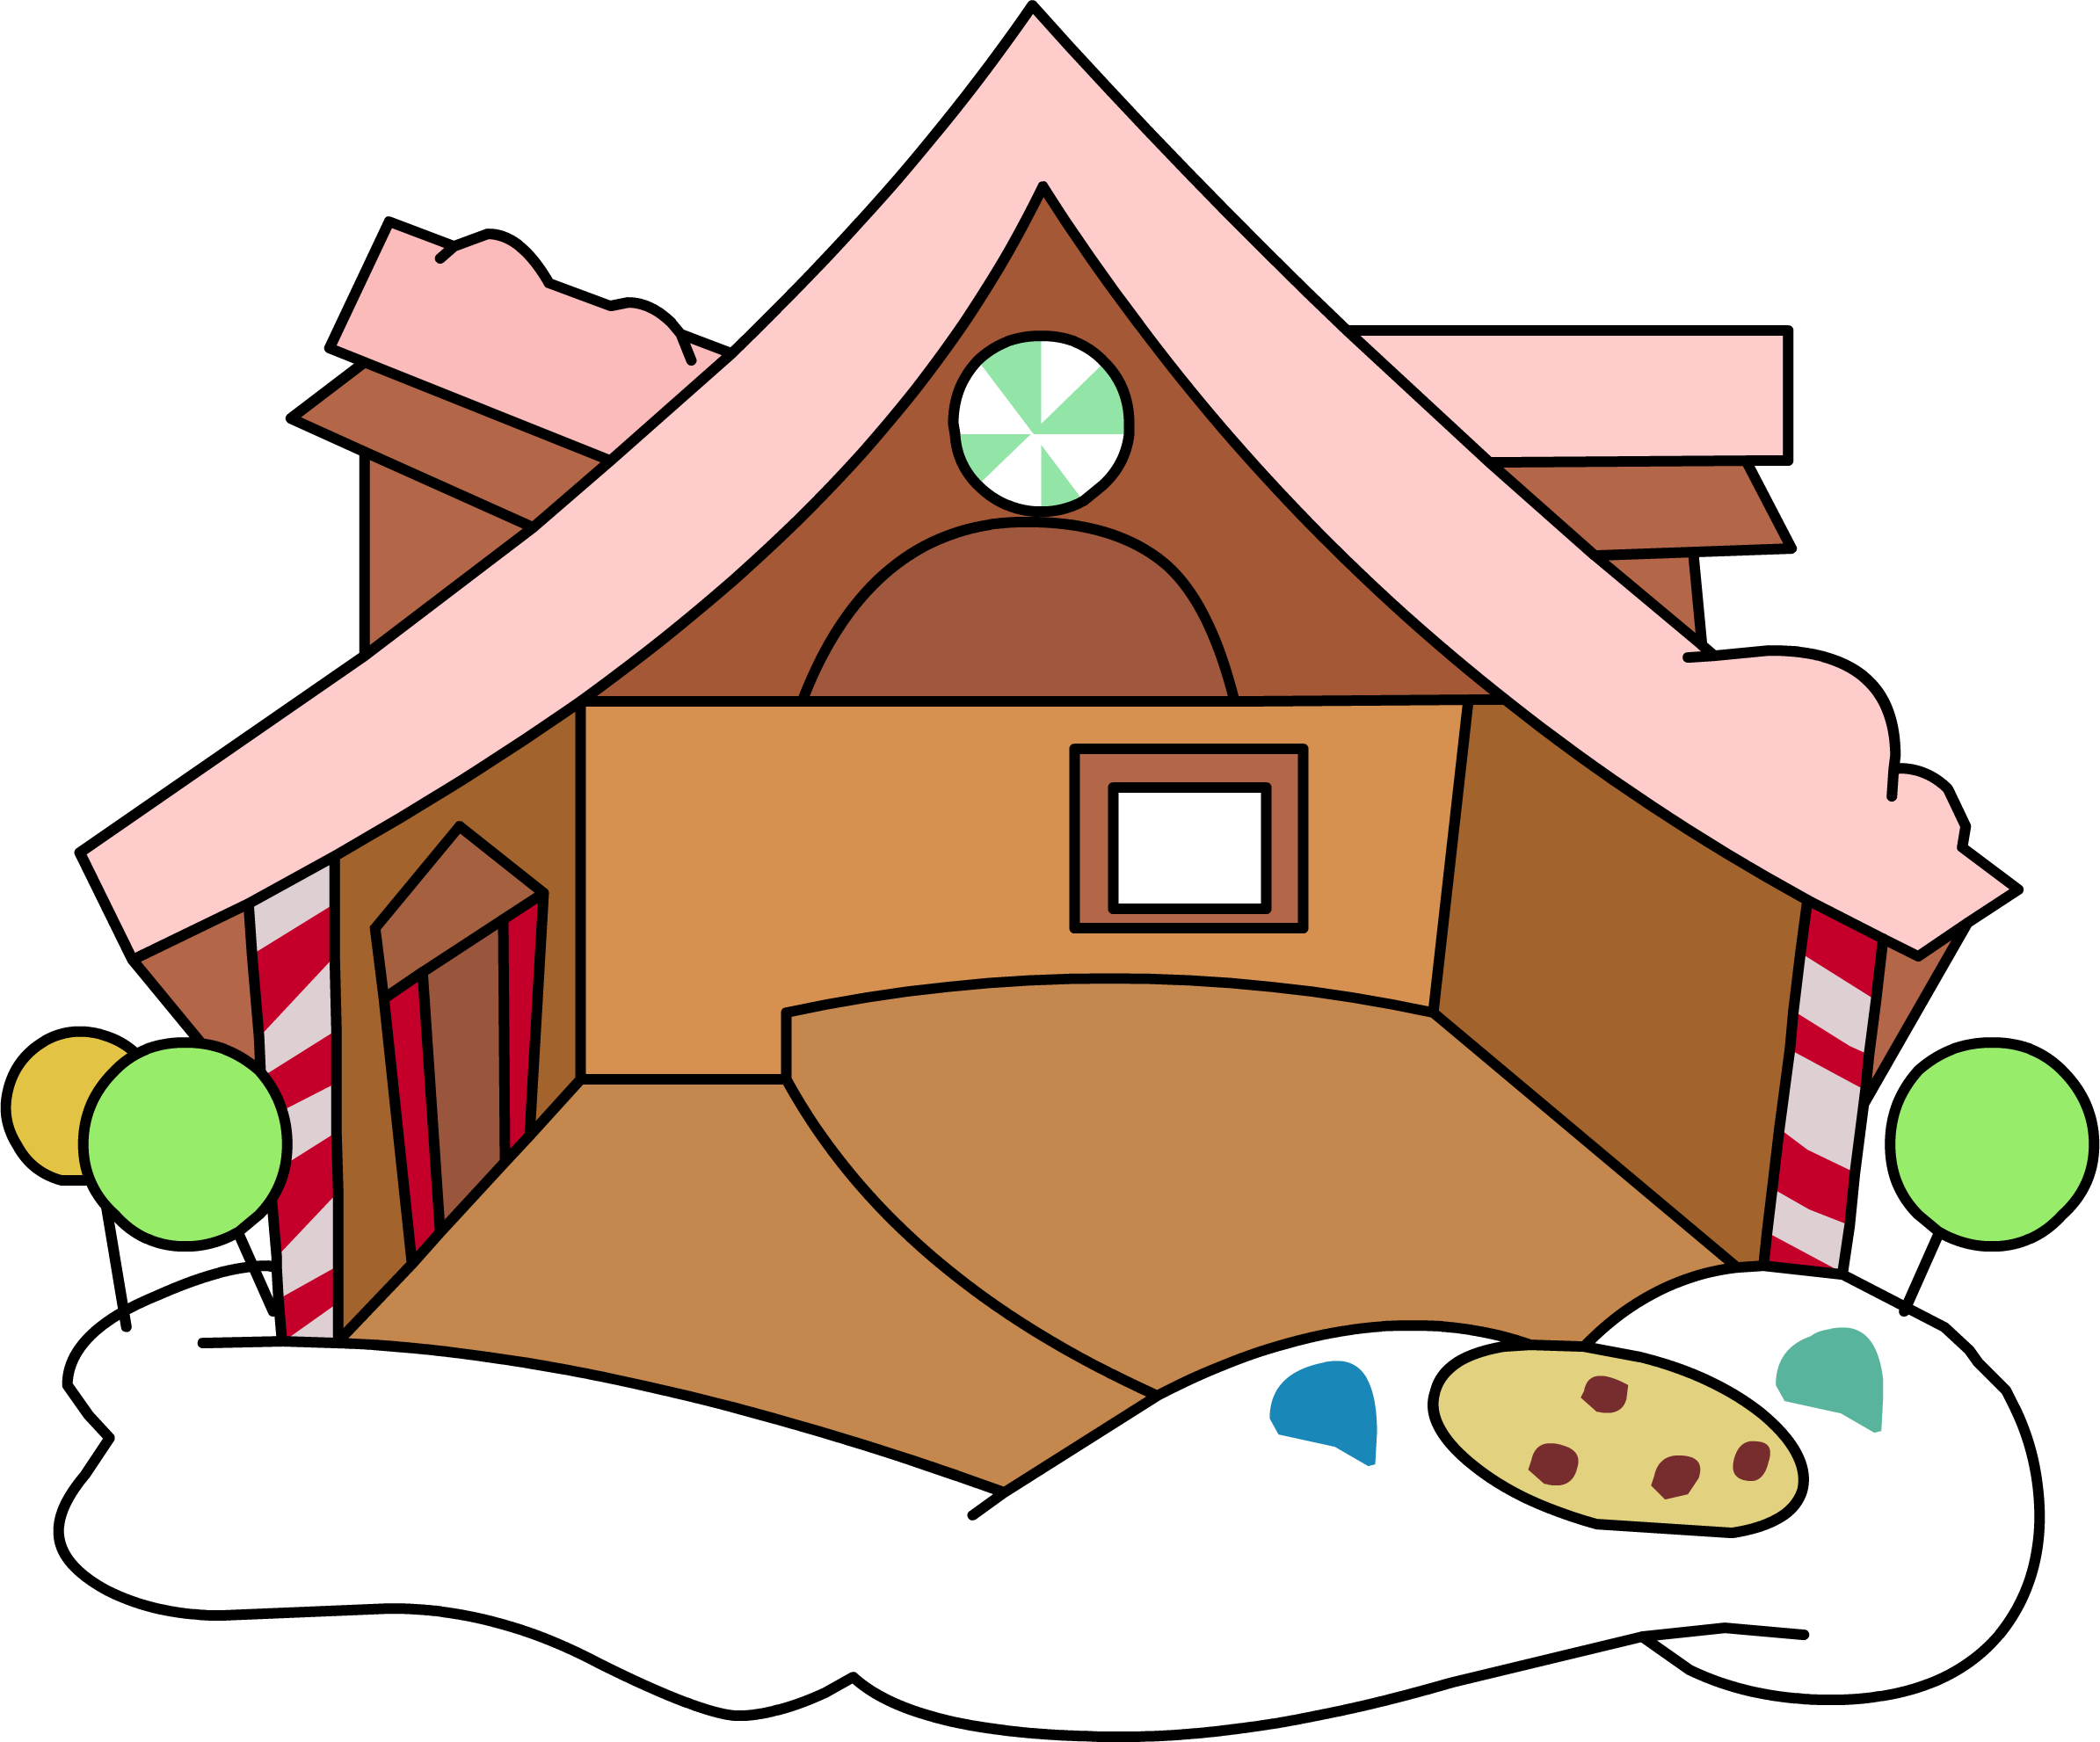 Download PNG image - Halloween Gingerbread House Transparent PNG 